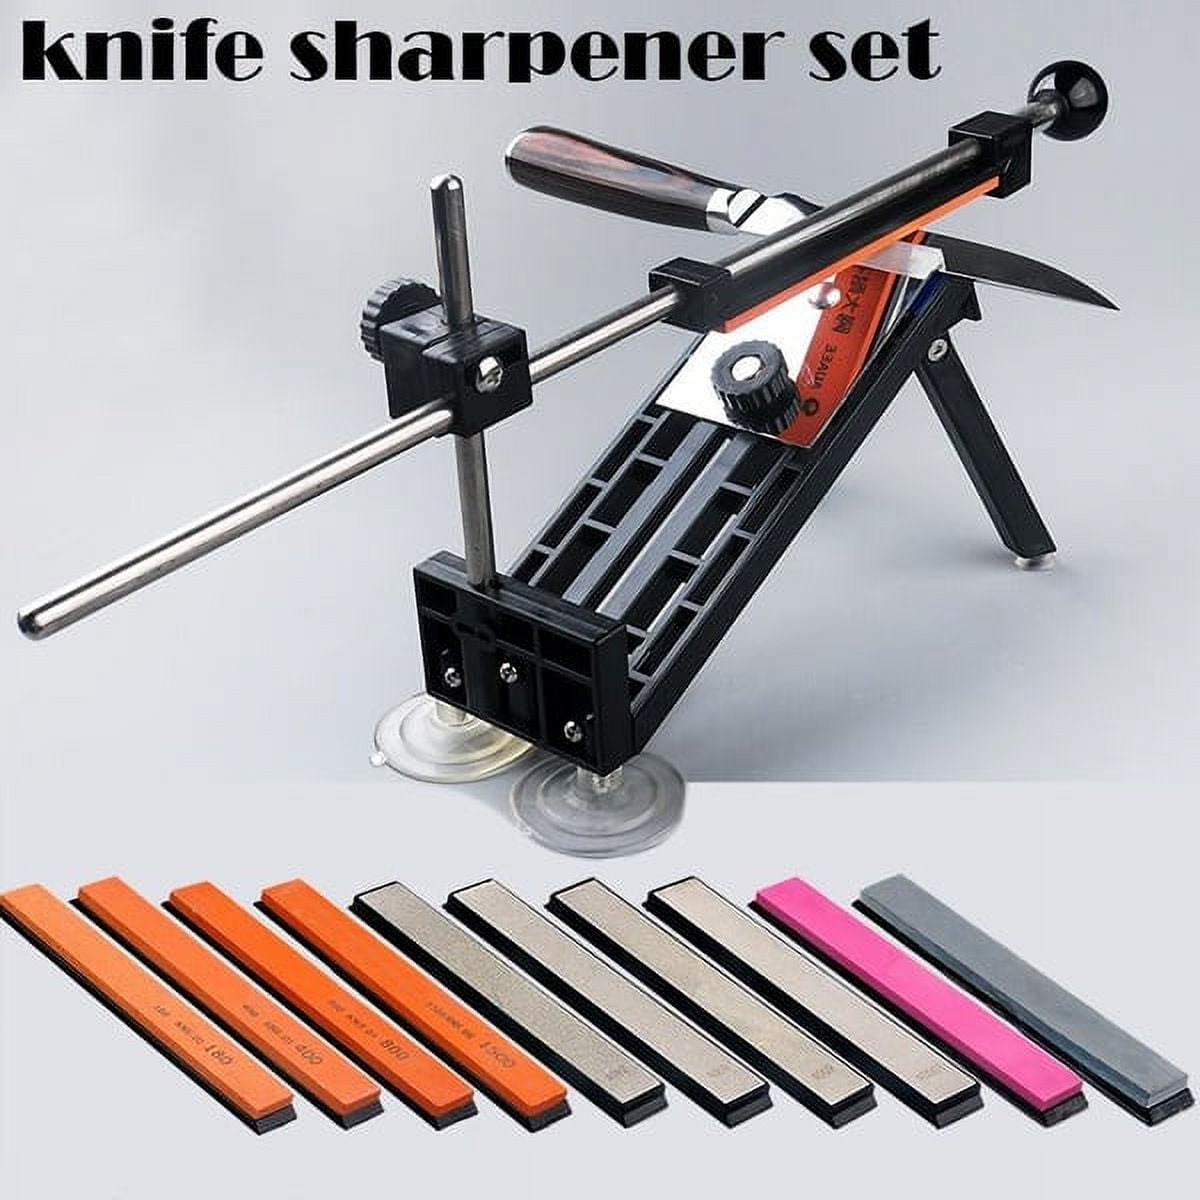 Professional Kitchen Knife Sharpener Sharpening NEW Updated Fix Fixed Angle  Kit for Sharpening & Filing Chainsaws & Other Blades III 